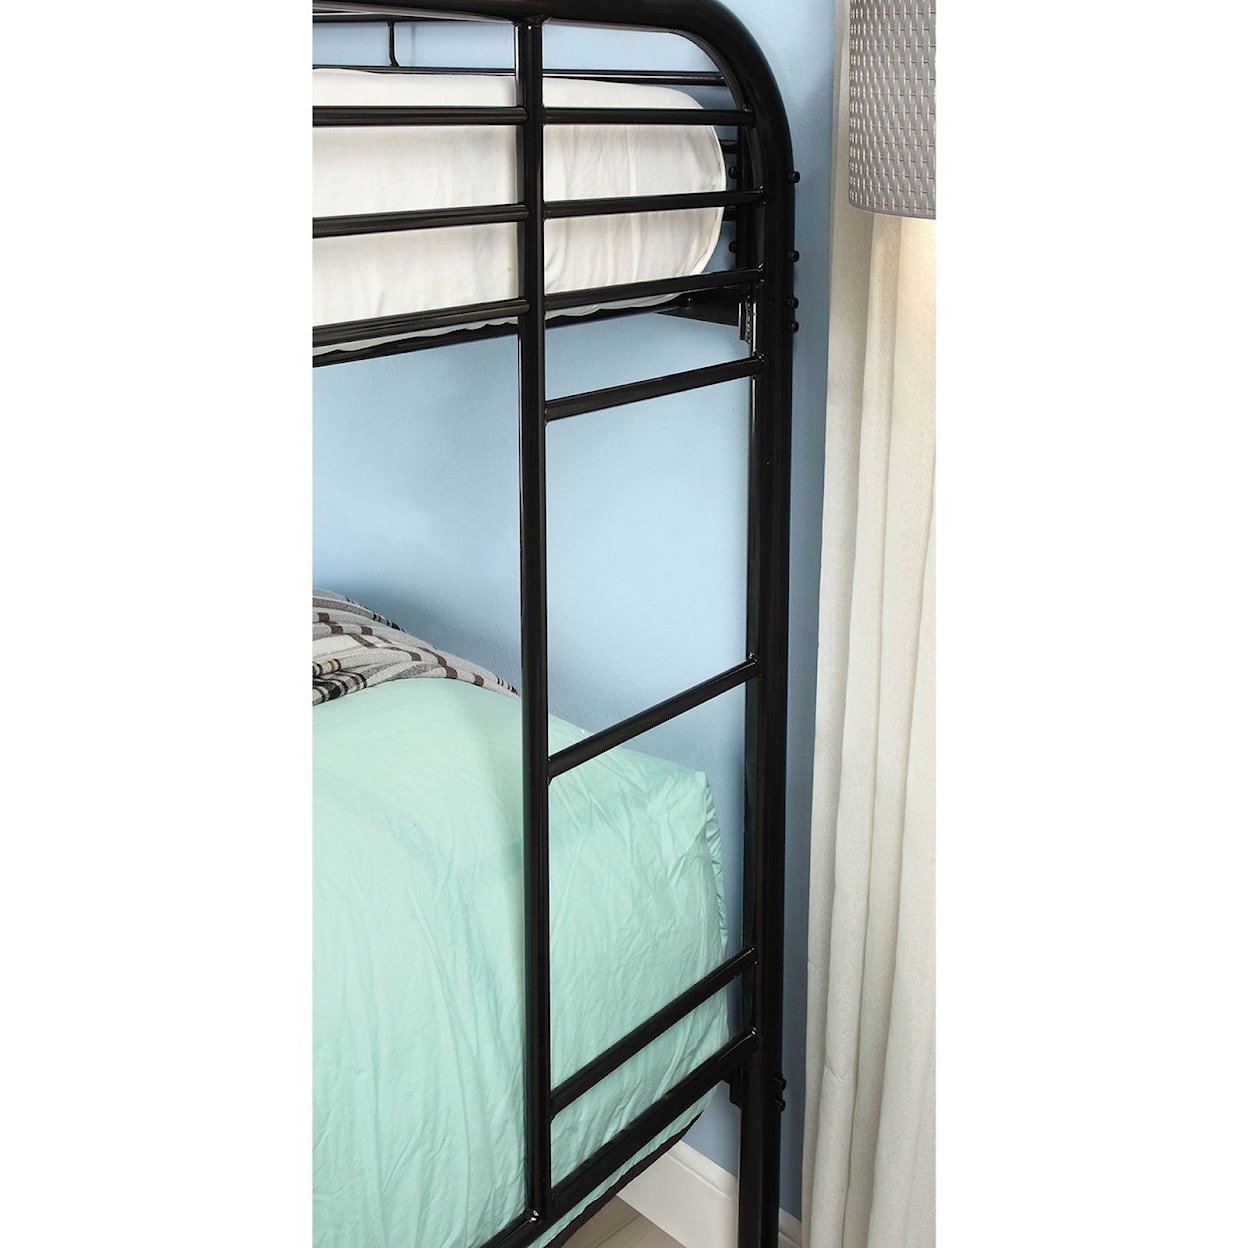 FUSA Opal Twin-over-Twin Bunk Bed